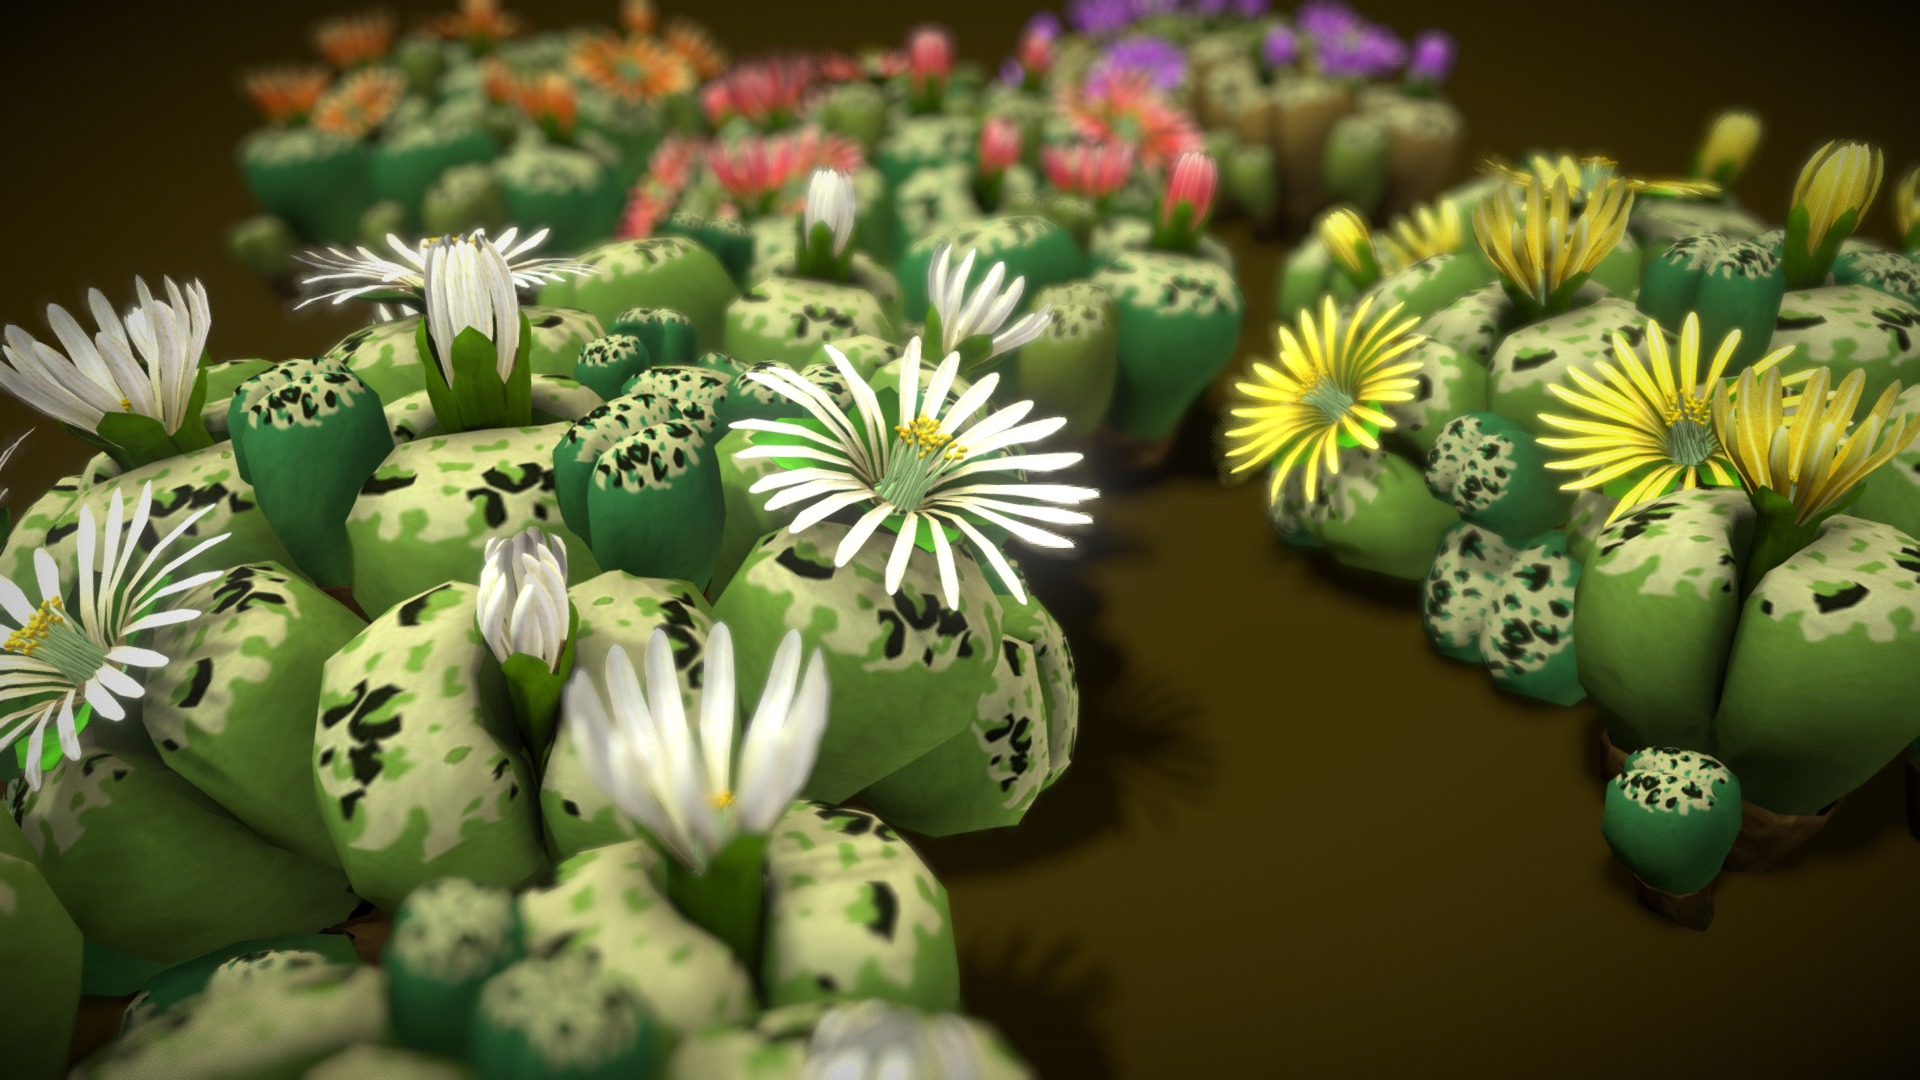 3D model Flower Lithops - This is a 3D model of the Flower Lithops. The 3D model is about a group of green and yellow flowers.